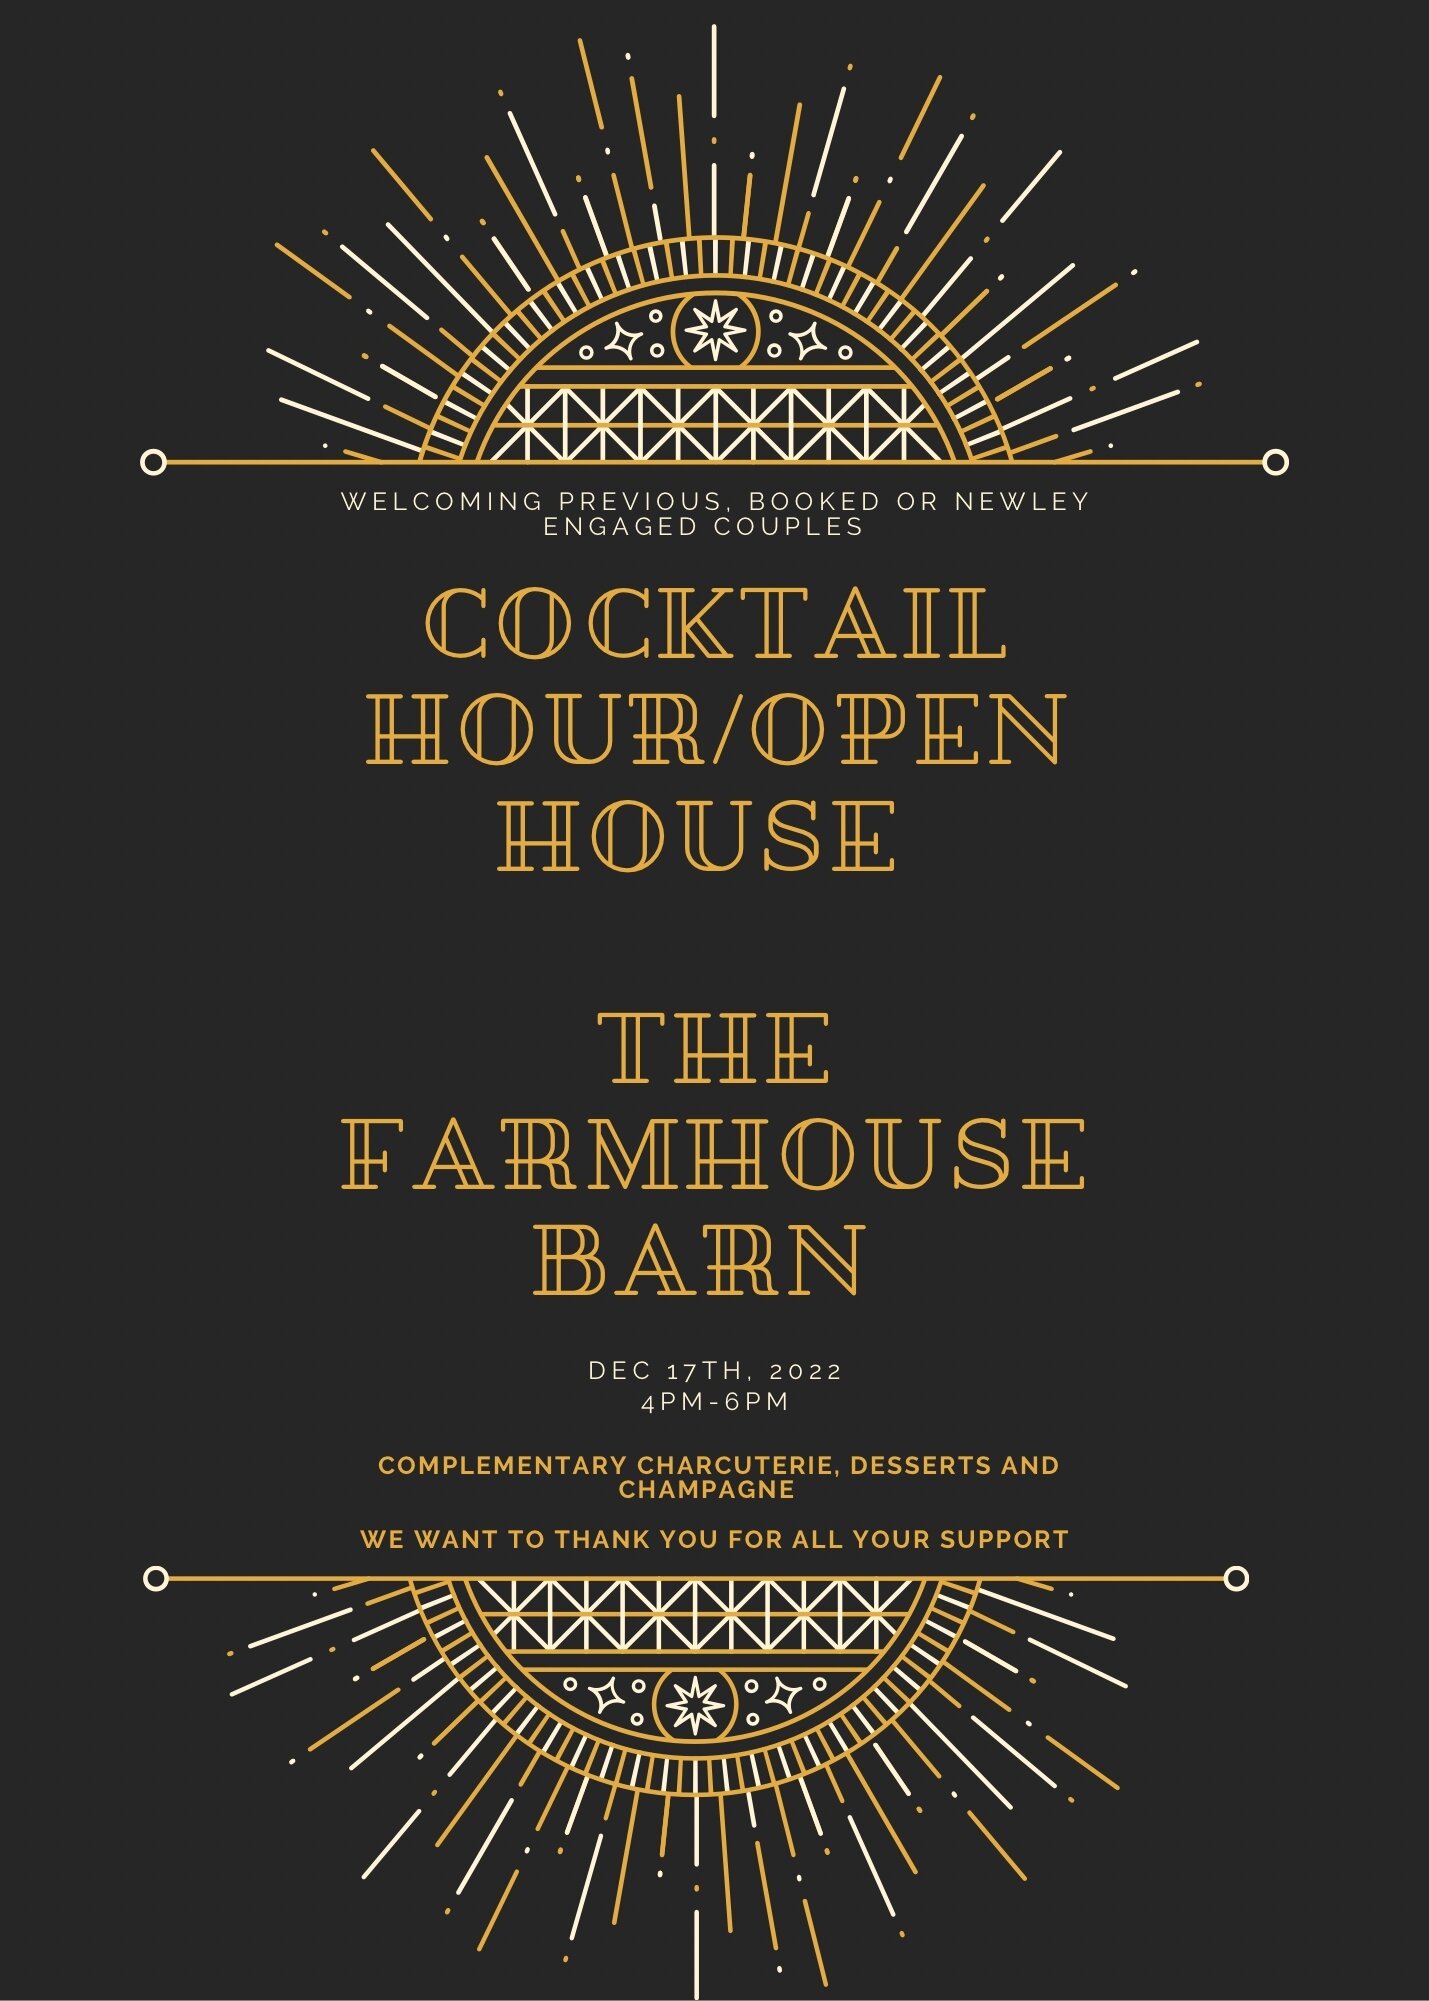 We are a week away from our Cocktail Hour and Open House at The Farmhouse Barn! 

Saturday, December 17th 
4-6 pm 

We want to thank everyone for supporting us the last few years and look forward to our new couples and adventures. Whether you are a p